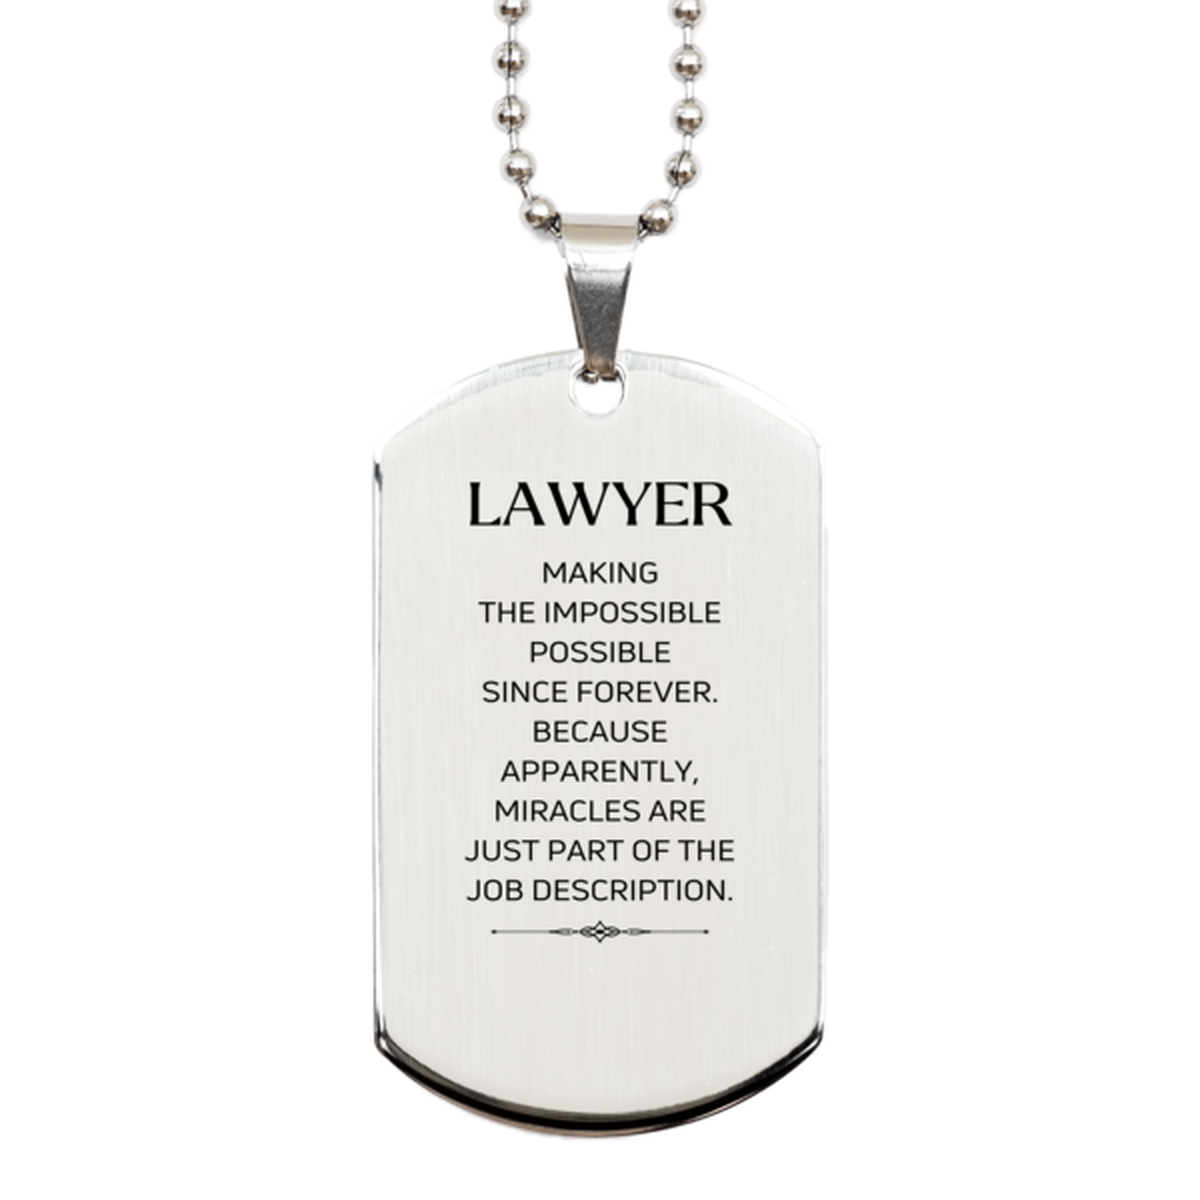 Funny Lawyer Gifts, Miracles are just part of the job description, Inspirational Birthday Silver Dog Tag For Lawyer, Men, Women, Coworkers, Friends, Boss